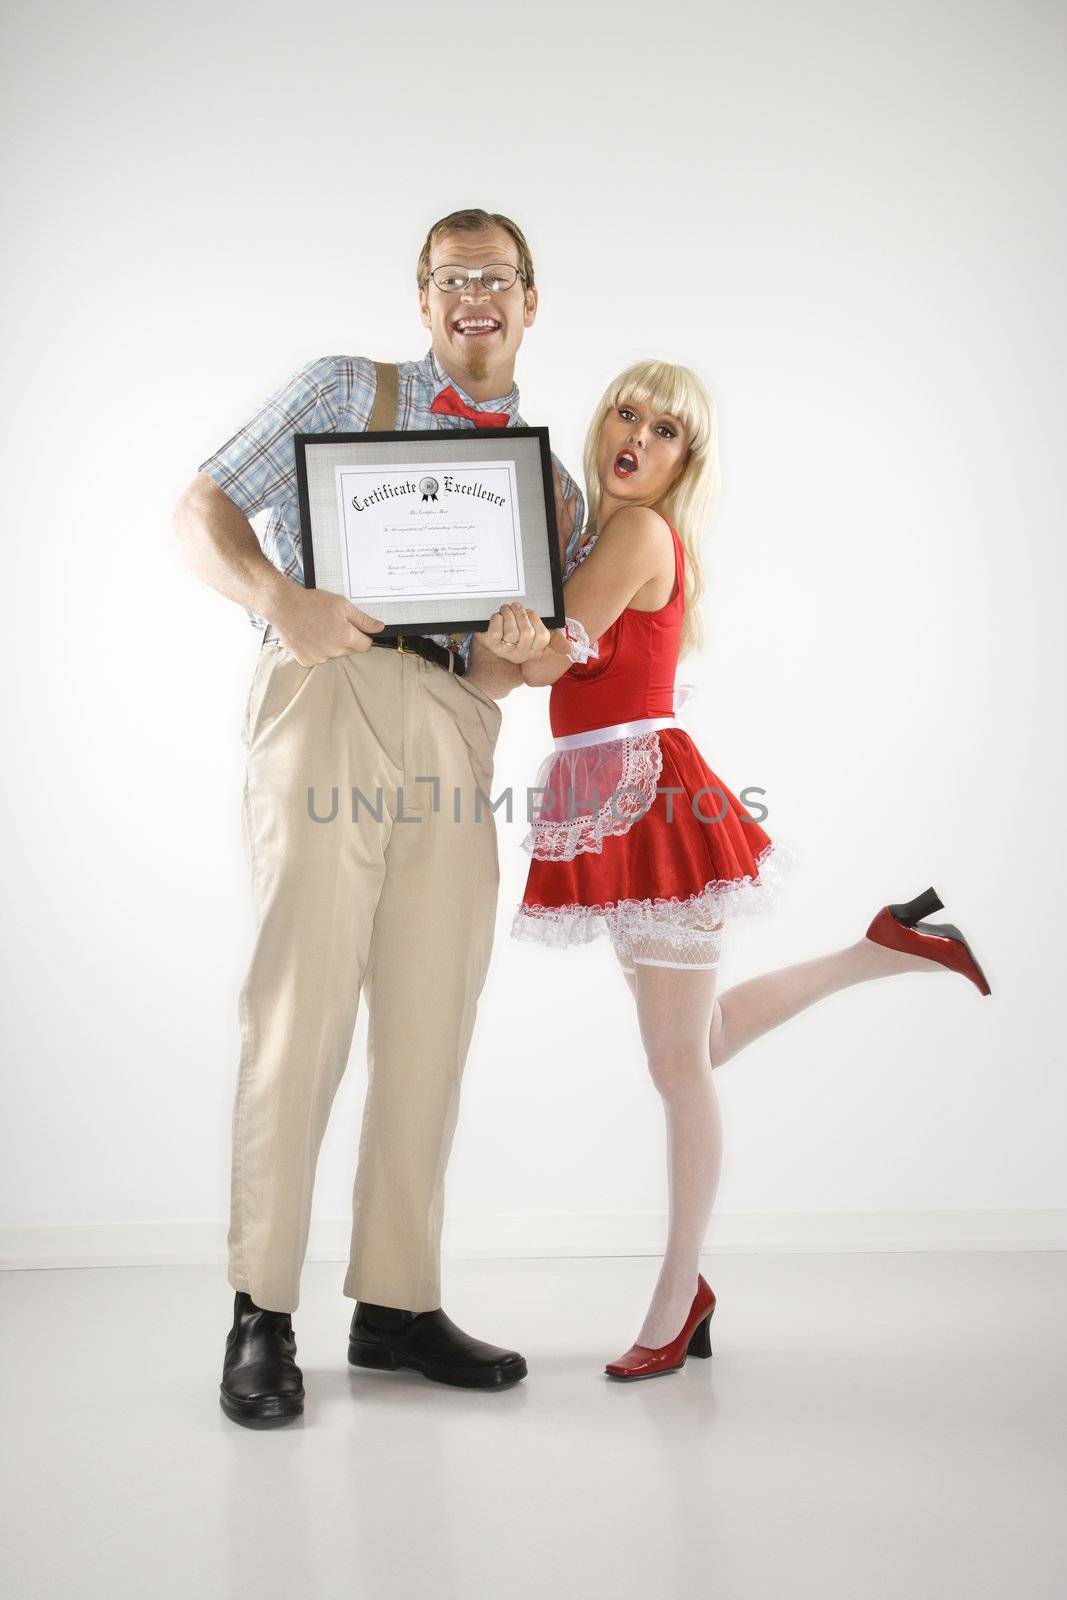 Young Caucasian man holding certificate with young woman.